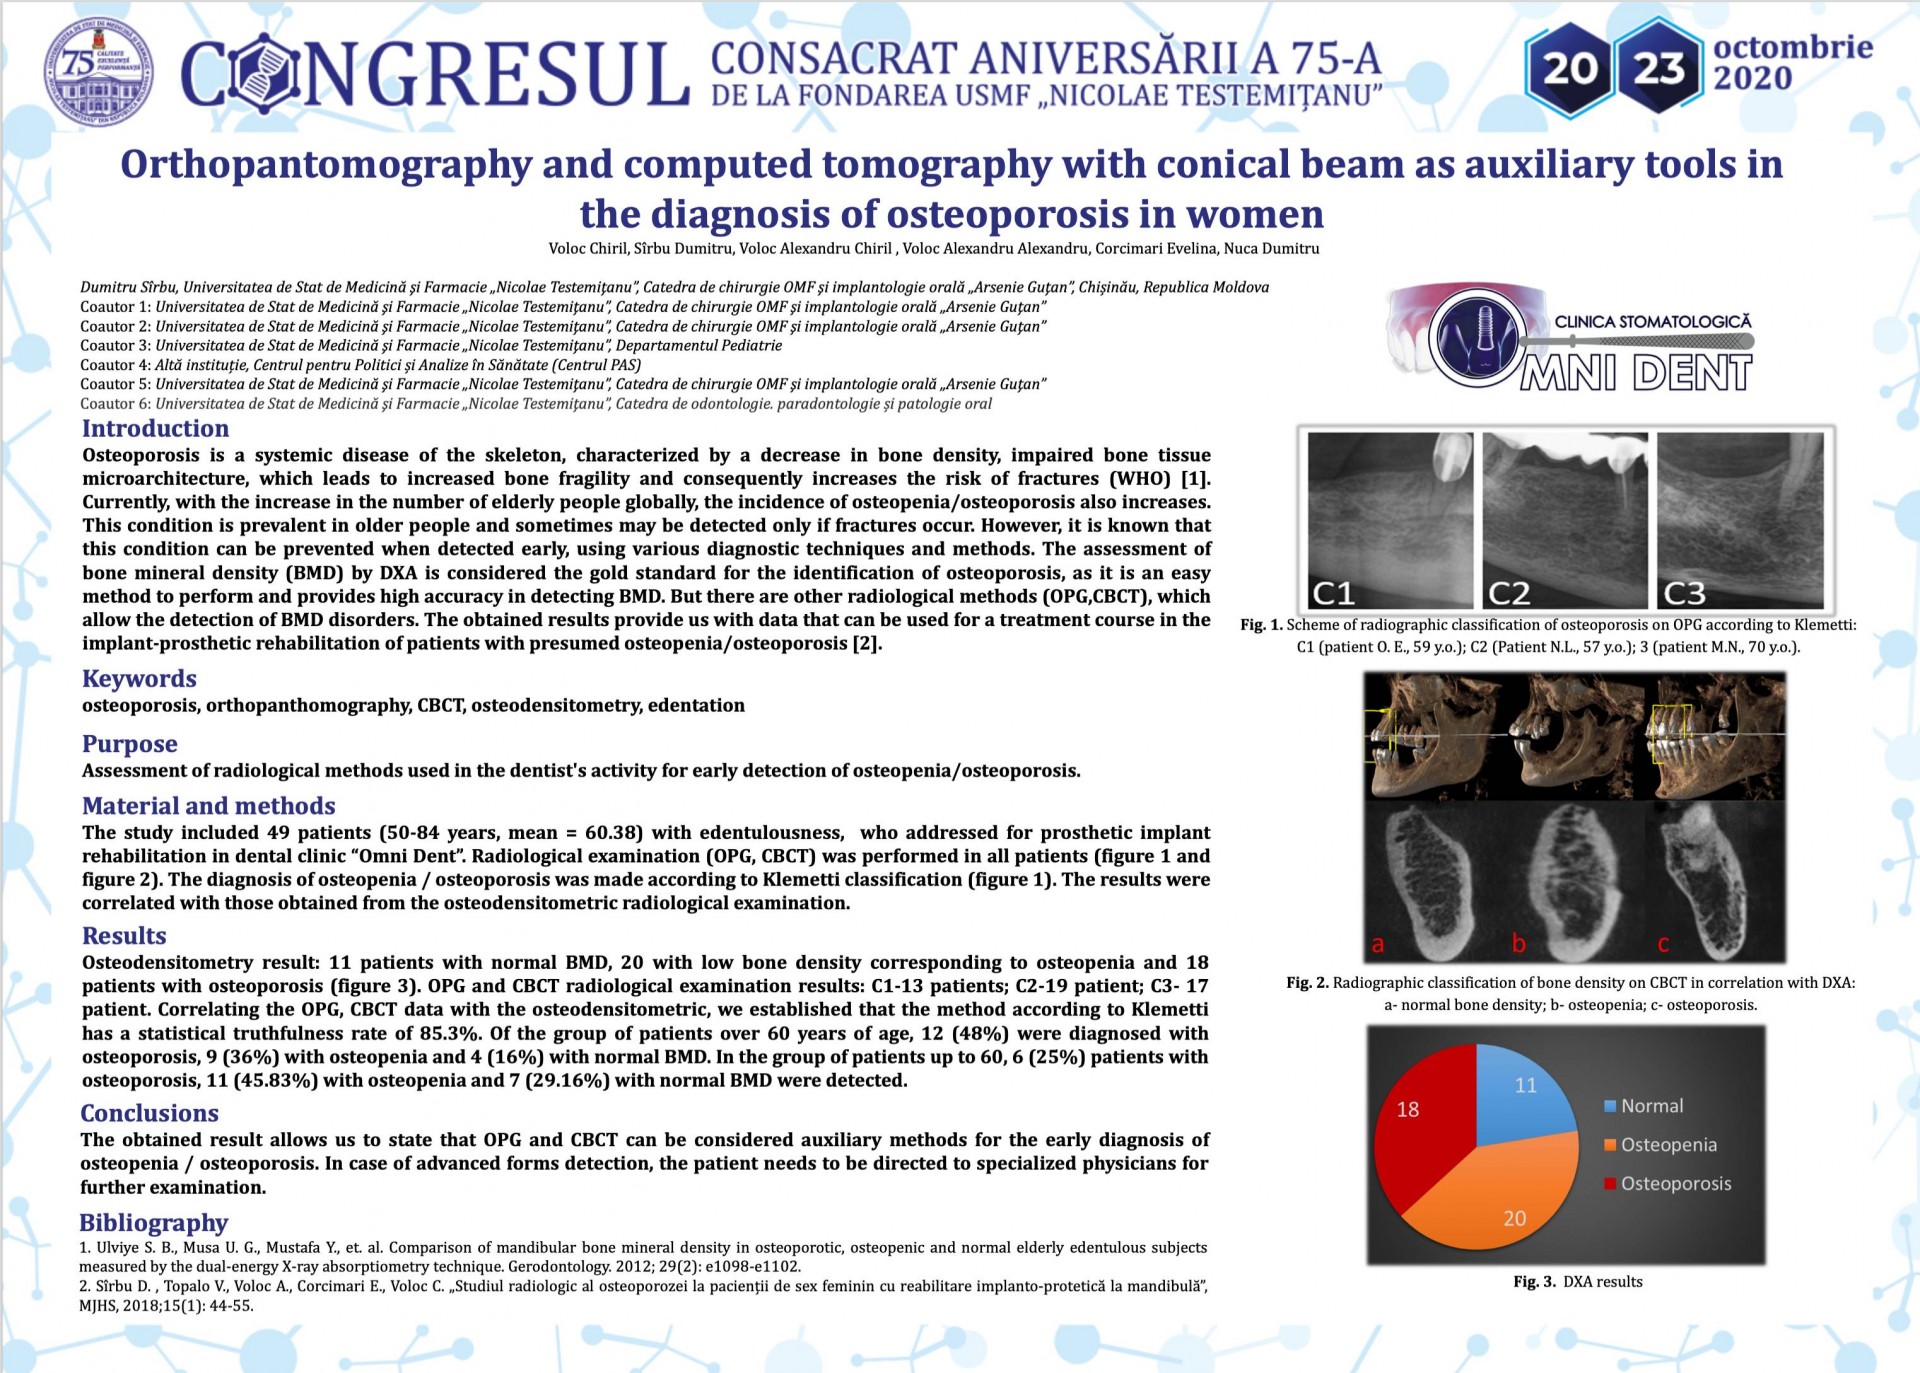 Orthopantomography and computed tomography with conical beam as auxiliary tools in the diagnosis of osteoporosis in women 